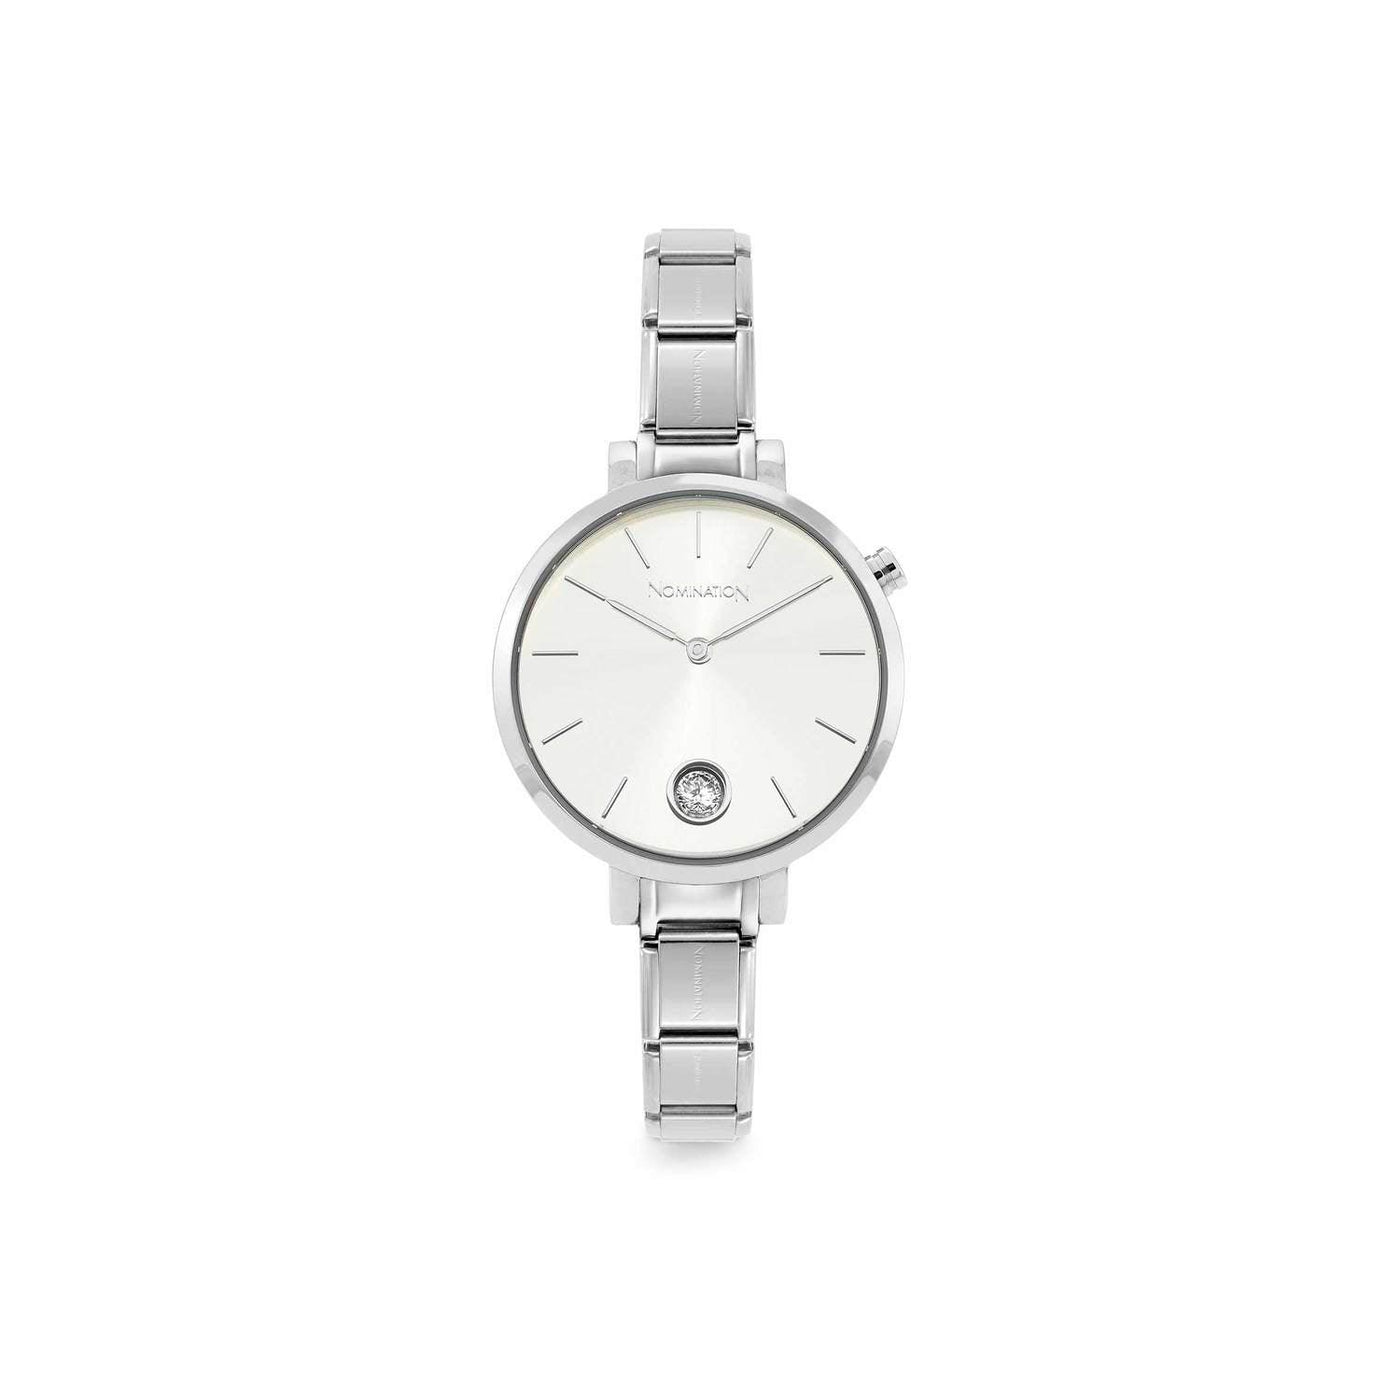 Nomination Sunray Silver and Cubic Zirconia Watch